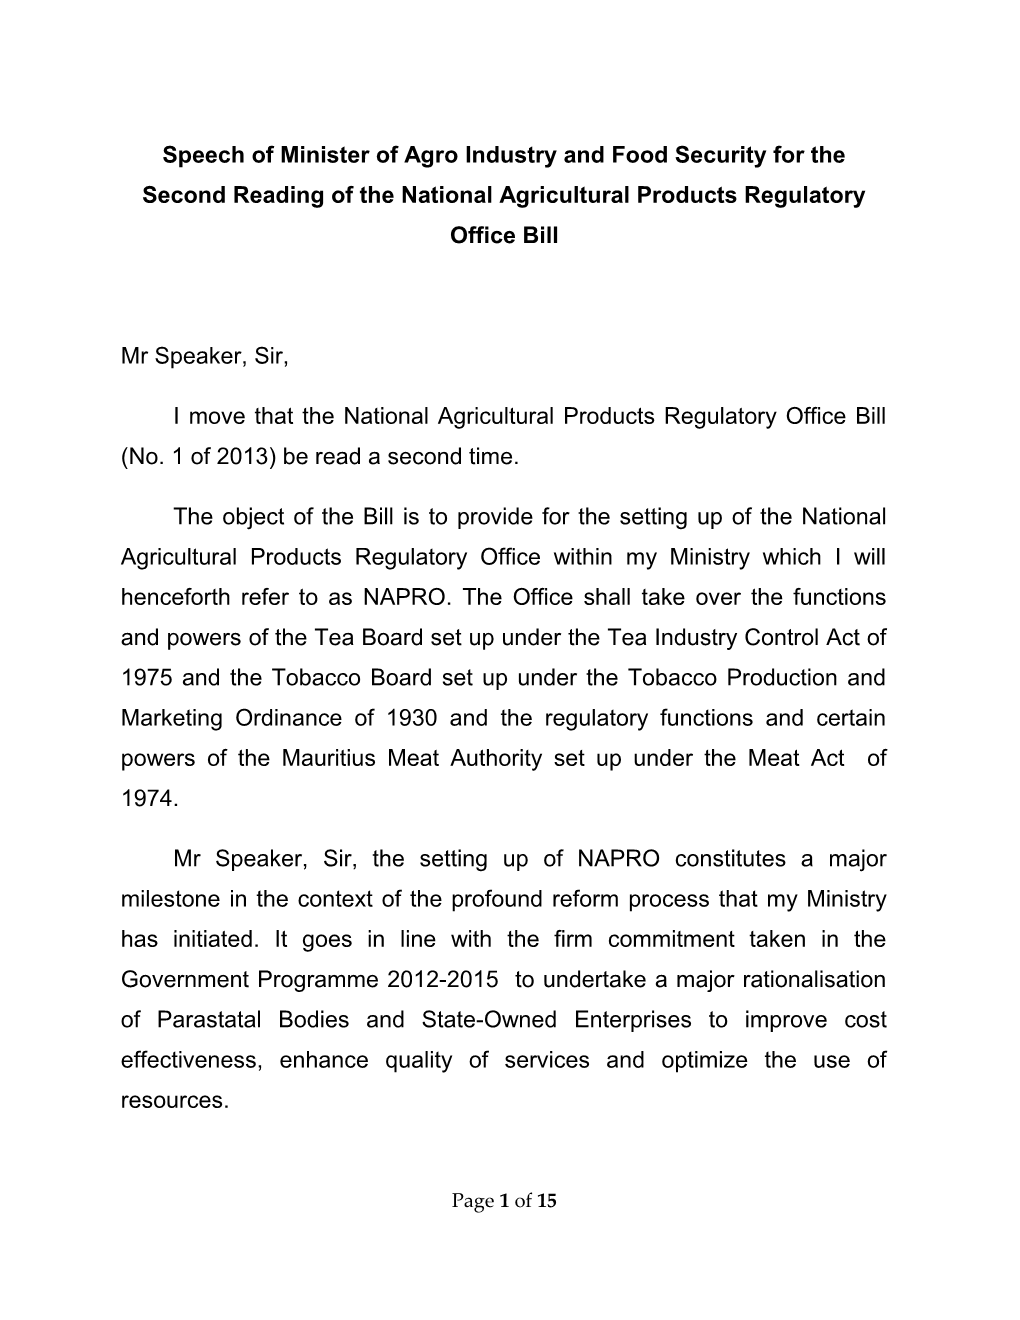 Speech of Minister of Agro Industry and Food Security for the Second Reading of the National